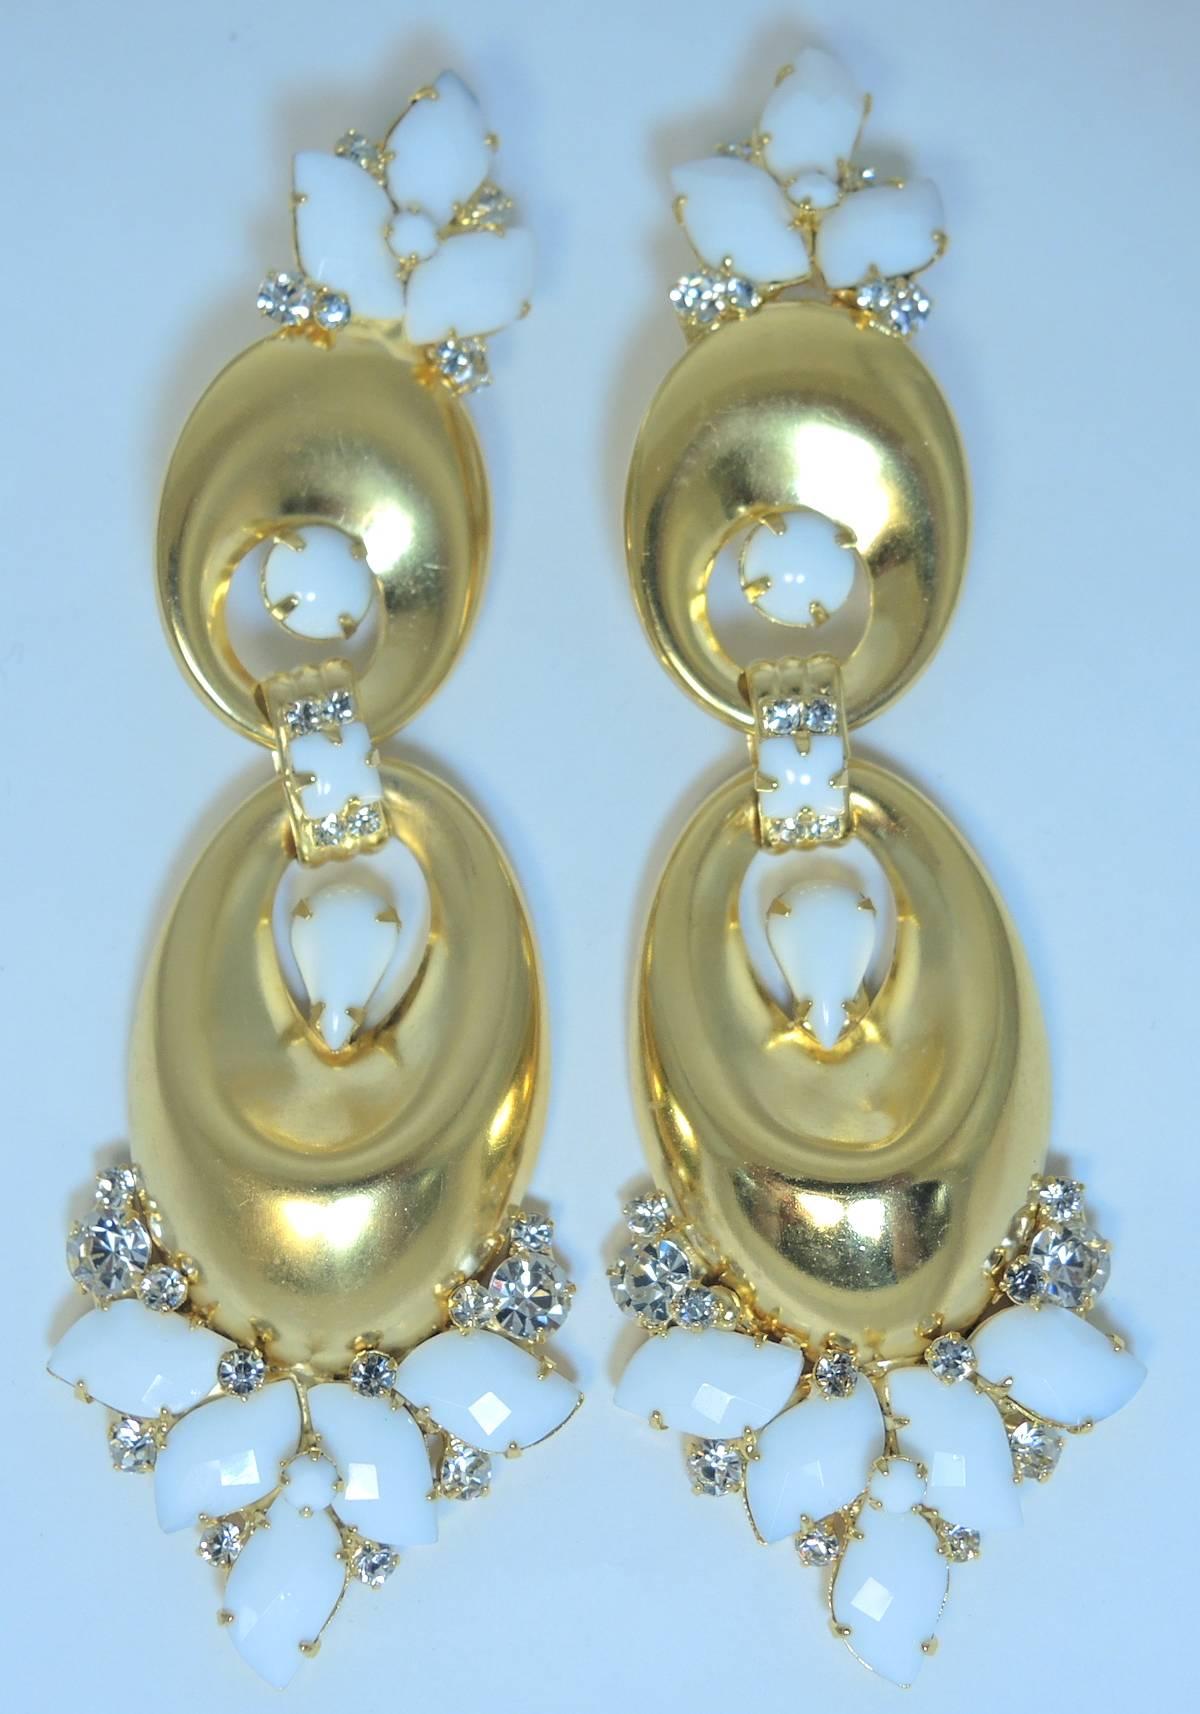 These are one-of-kind- long earrings by Robert Sorrell.  They feature two golden discs adorned with white faux pearl leaves and crystal accents. They measure a whopping 5” x 1-1/4” and are signed “Sorrell Originals”. They are in excellent condition.